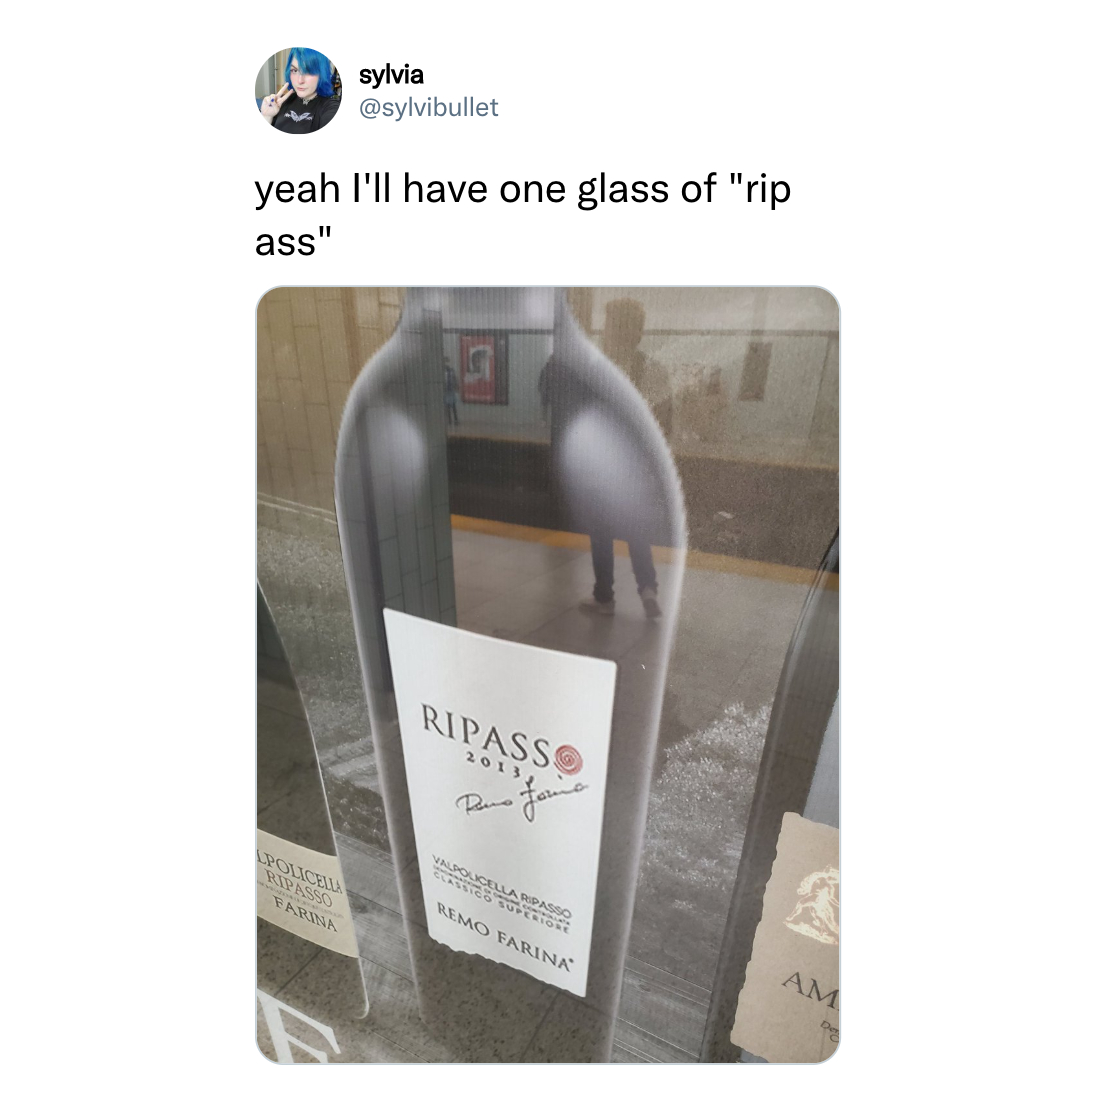 funny memes and tweets - wine bottle - sylvia yeah I'll have one glass of "rip ass" Ripass 2013 Rus faire Lpolicell Ripasso Farinn Ssico Sellano Remo Farinn Am